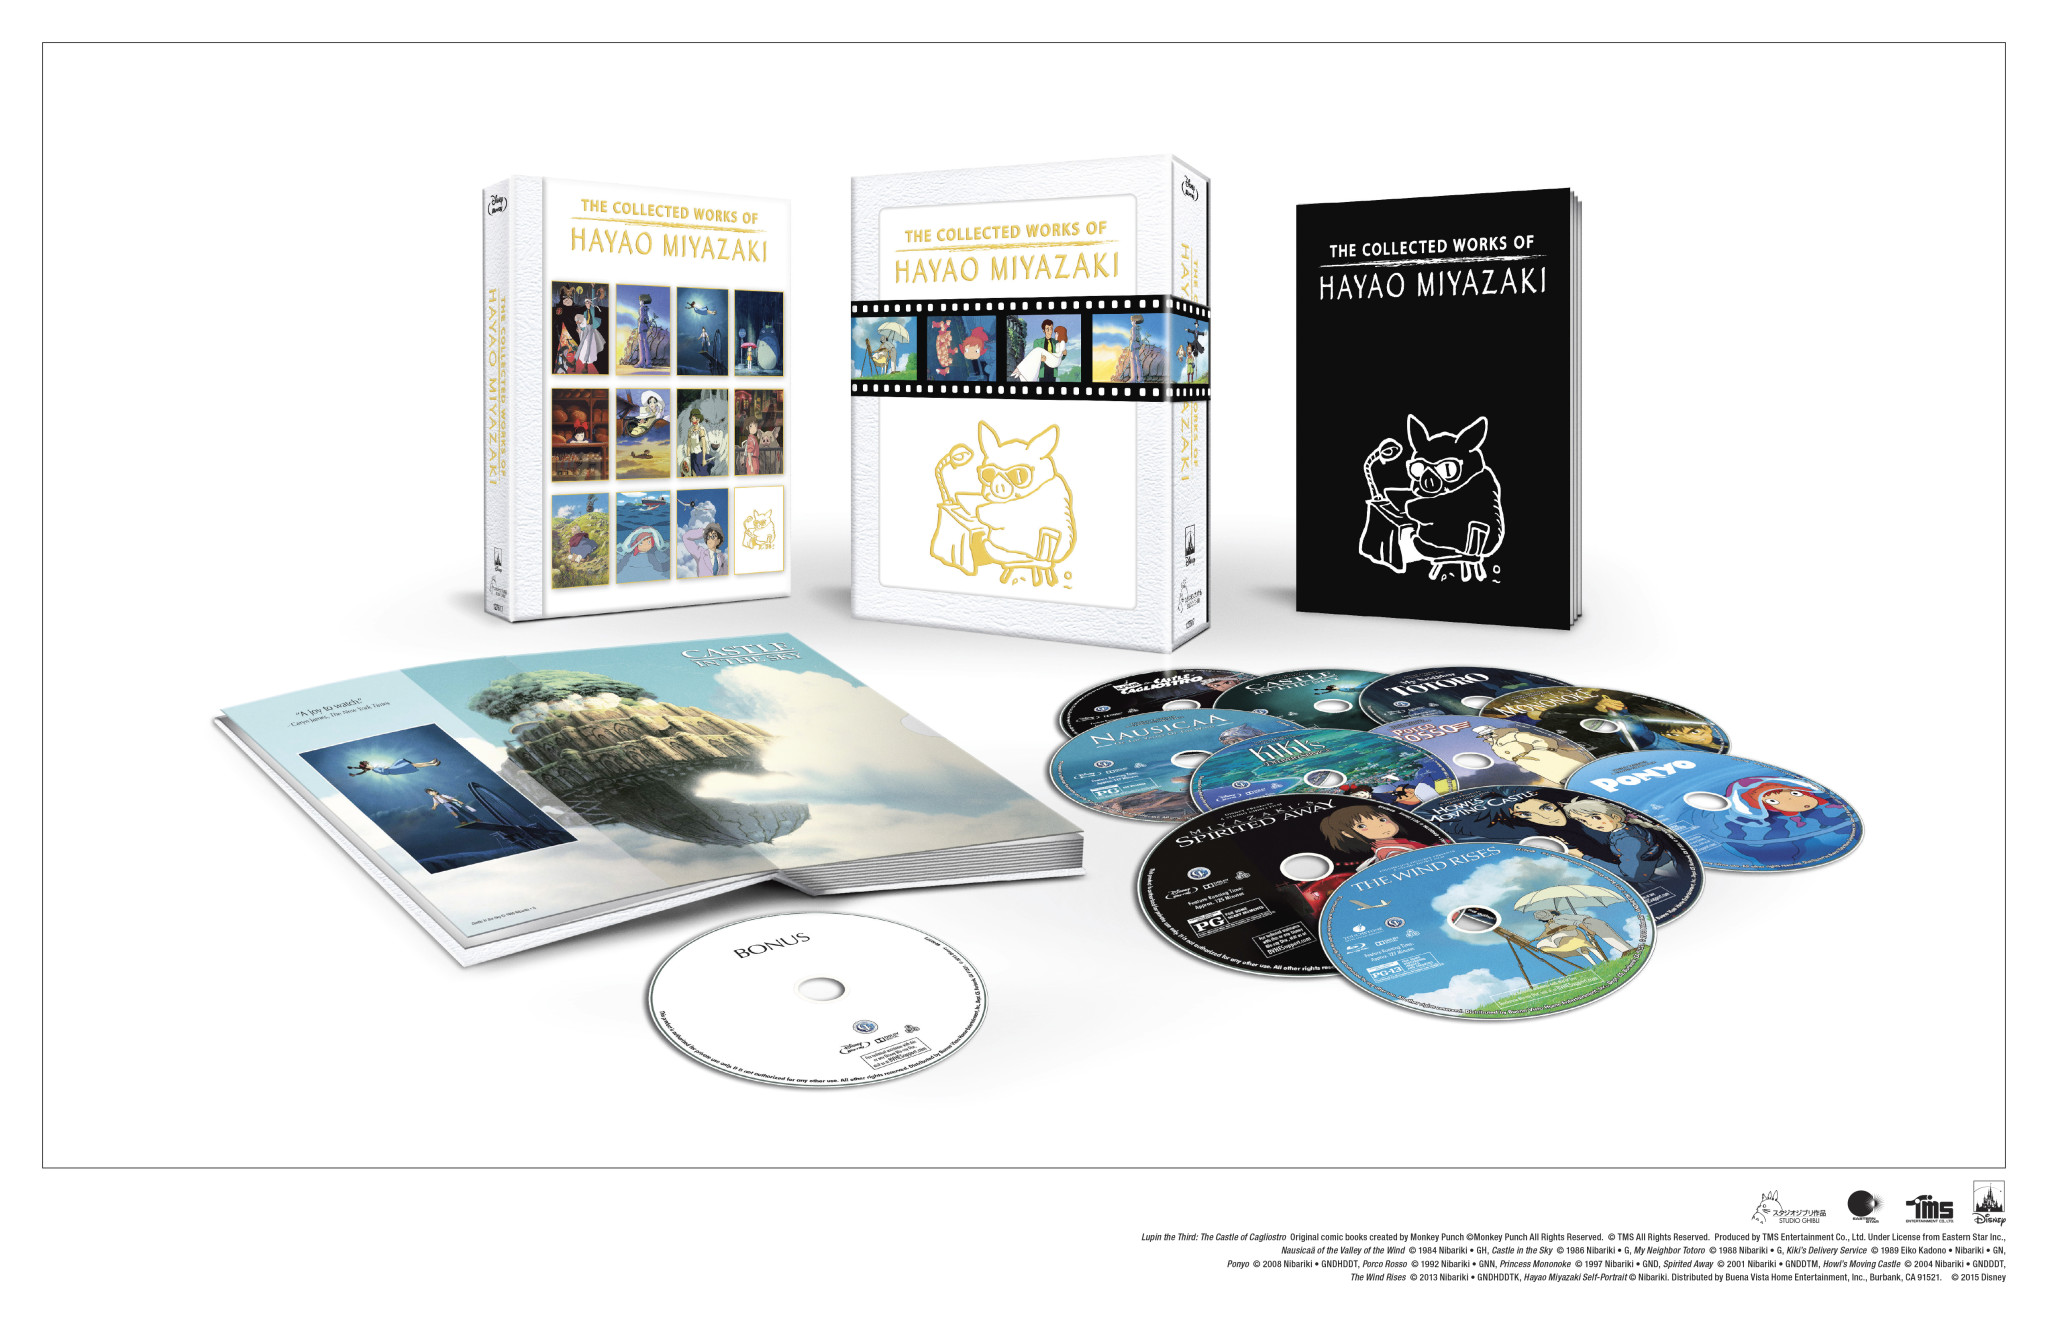 The Collected Works of Hayao Miyazaki Available In US For The First Time!